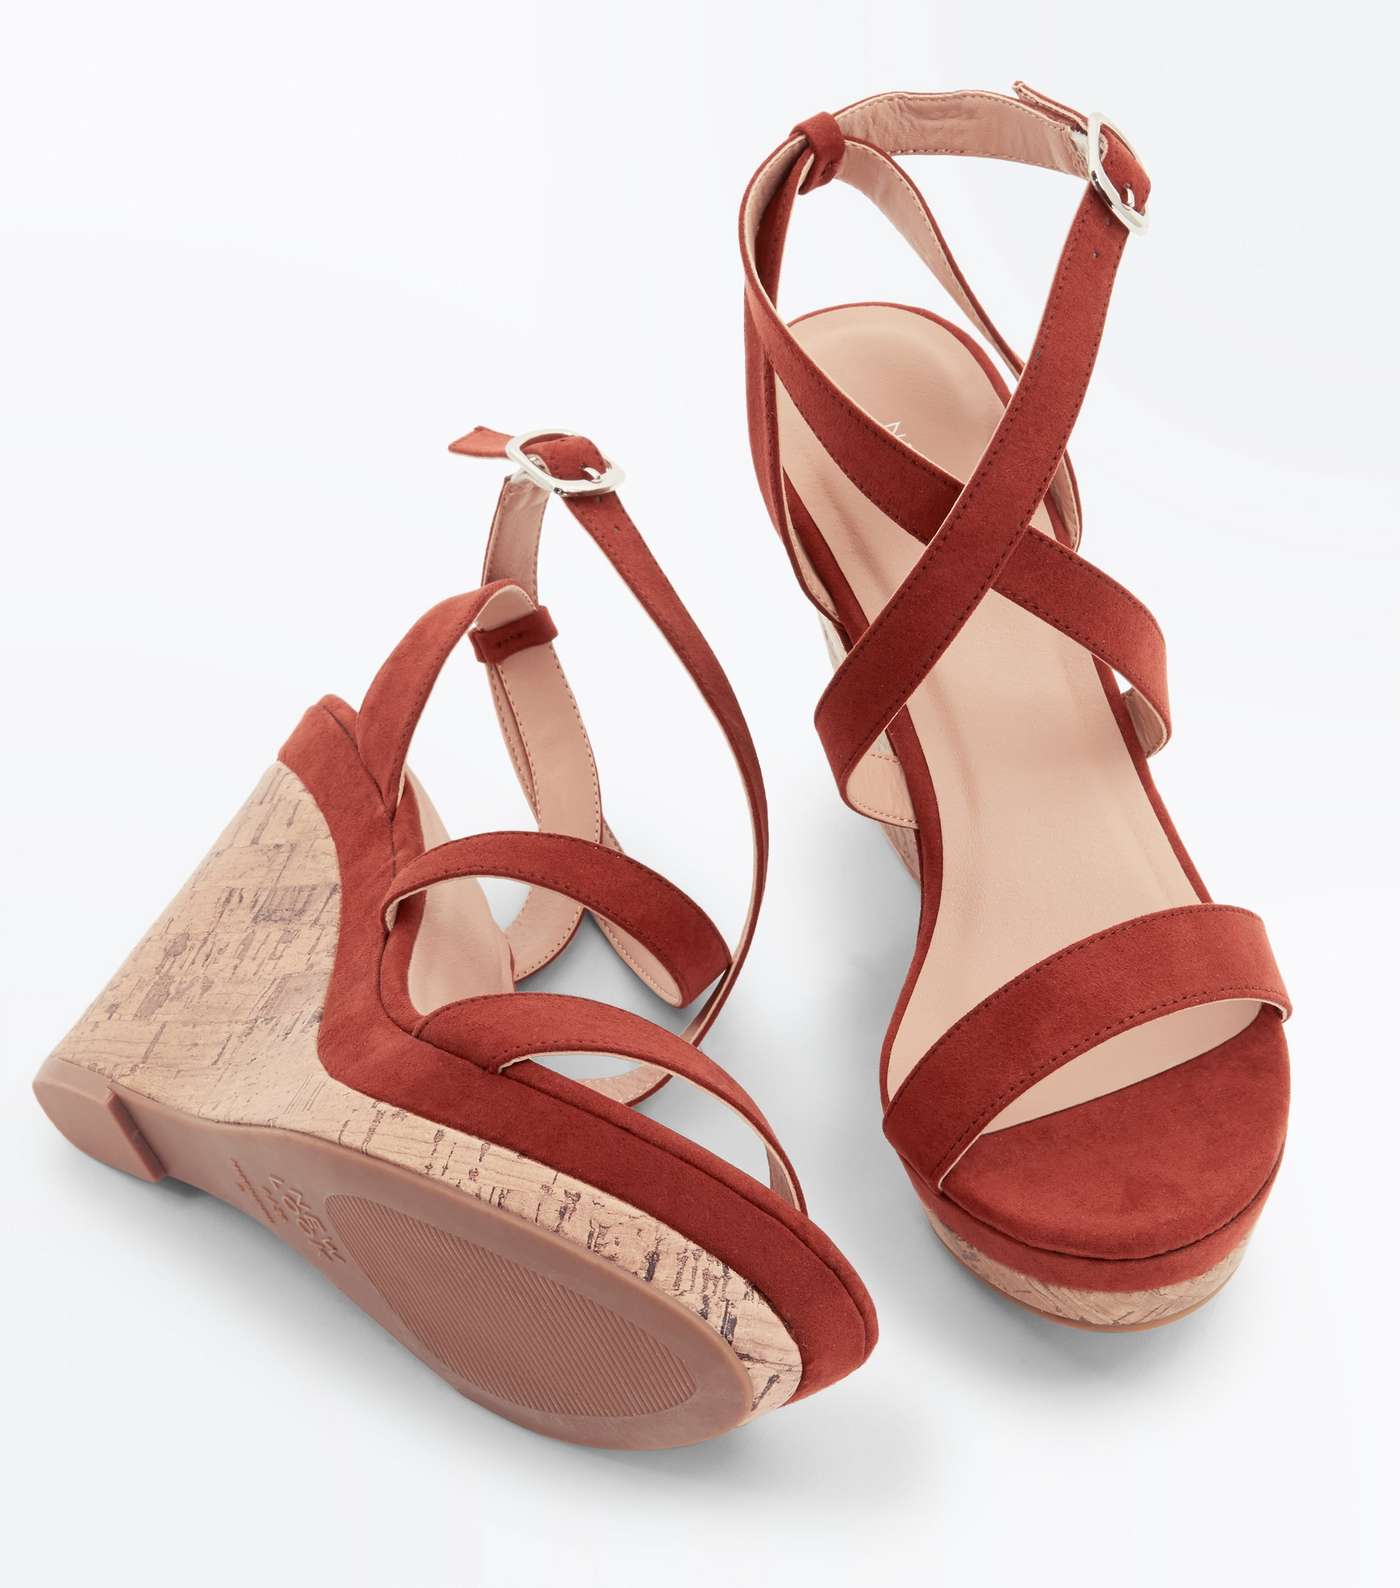 Rust Suedette Strappy Cork Wedges Image 3